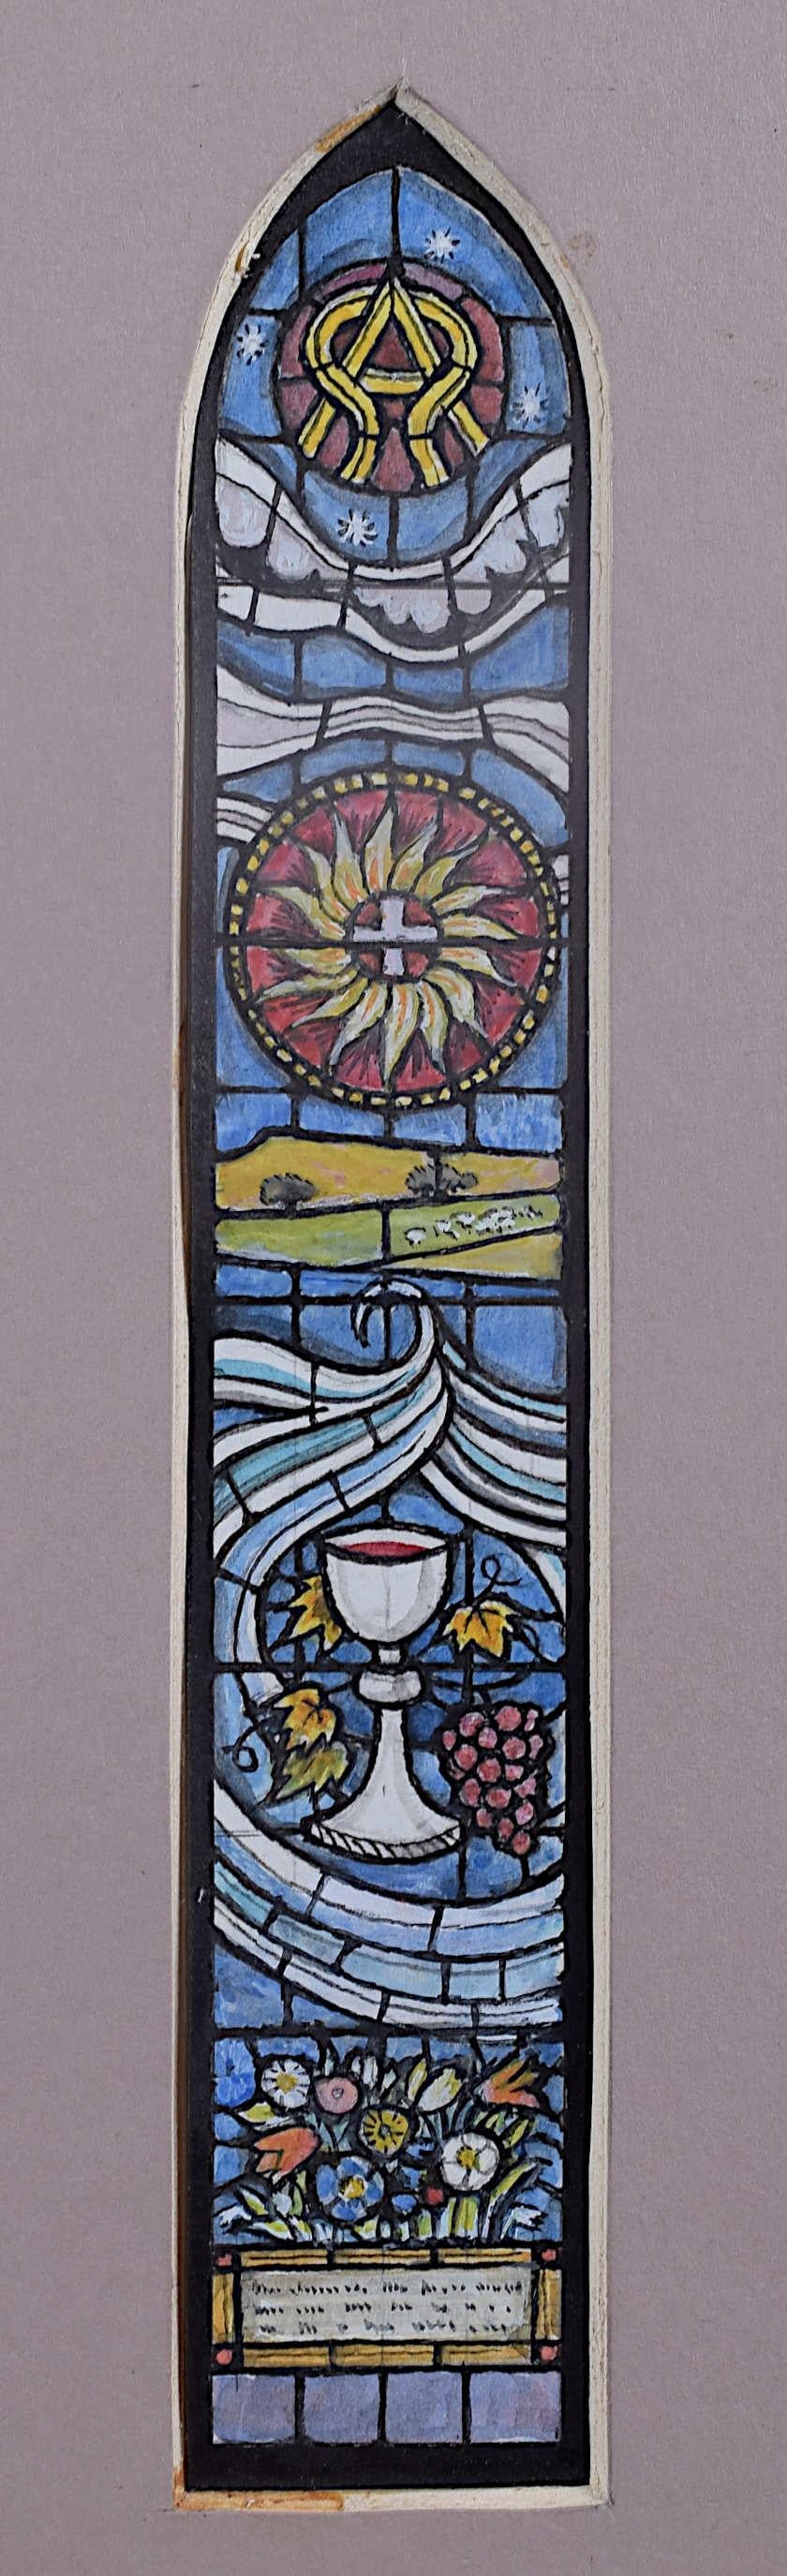 We acquired a series of watercolour stained glass designs from Jane Gray's studio. To find more scroll down to "More from this Seller" and below it click on "See all from this seller." 

Jane Gray (b.1931)
Stained Glass Design
Watercolour
20.5 x 3.5